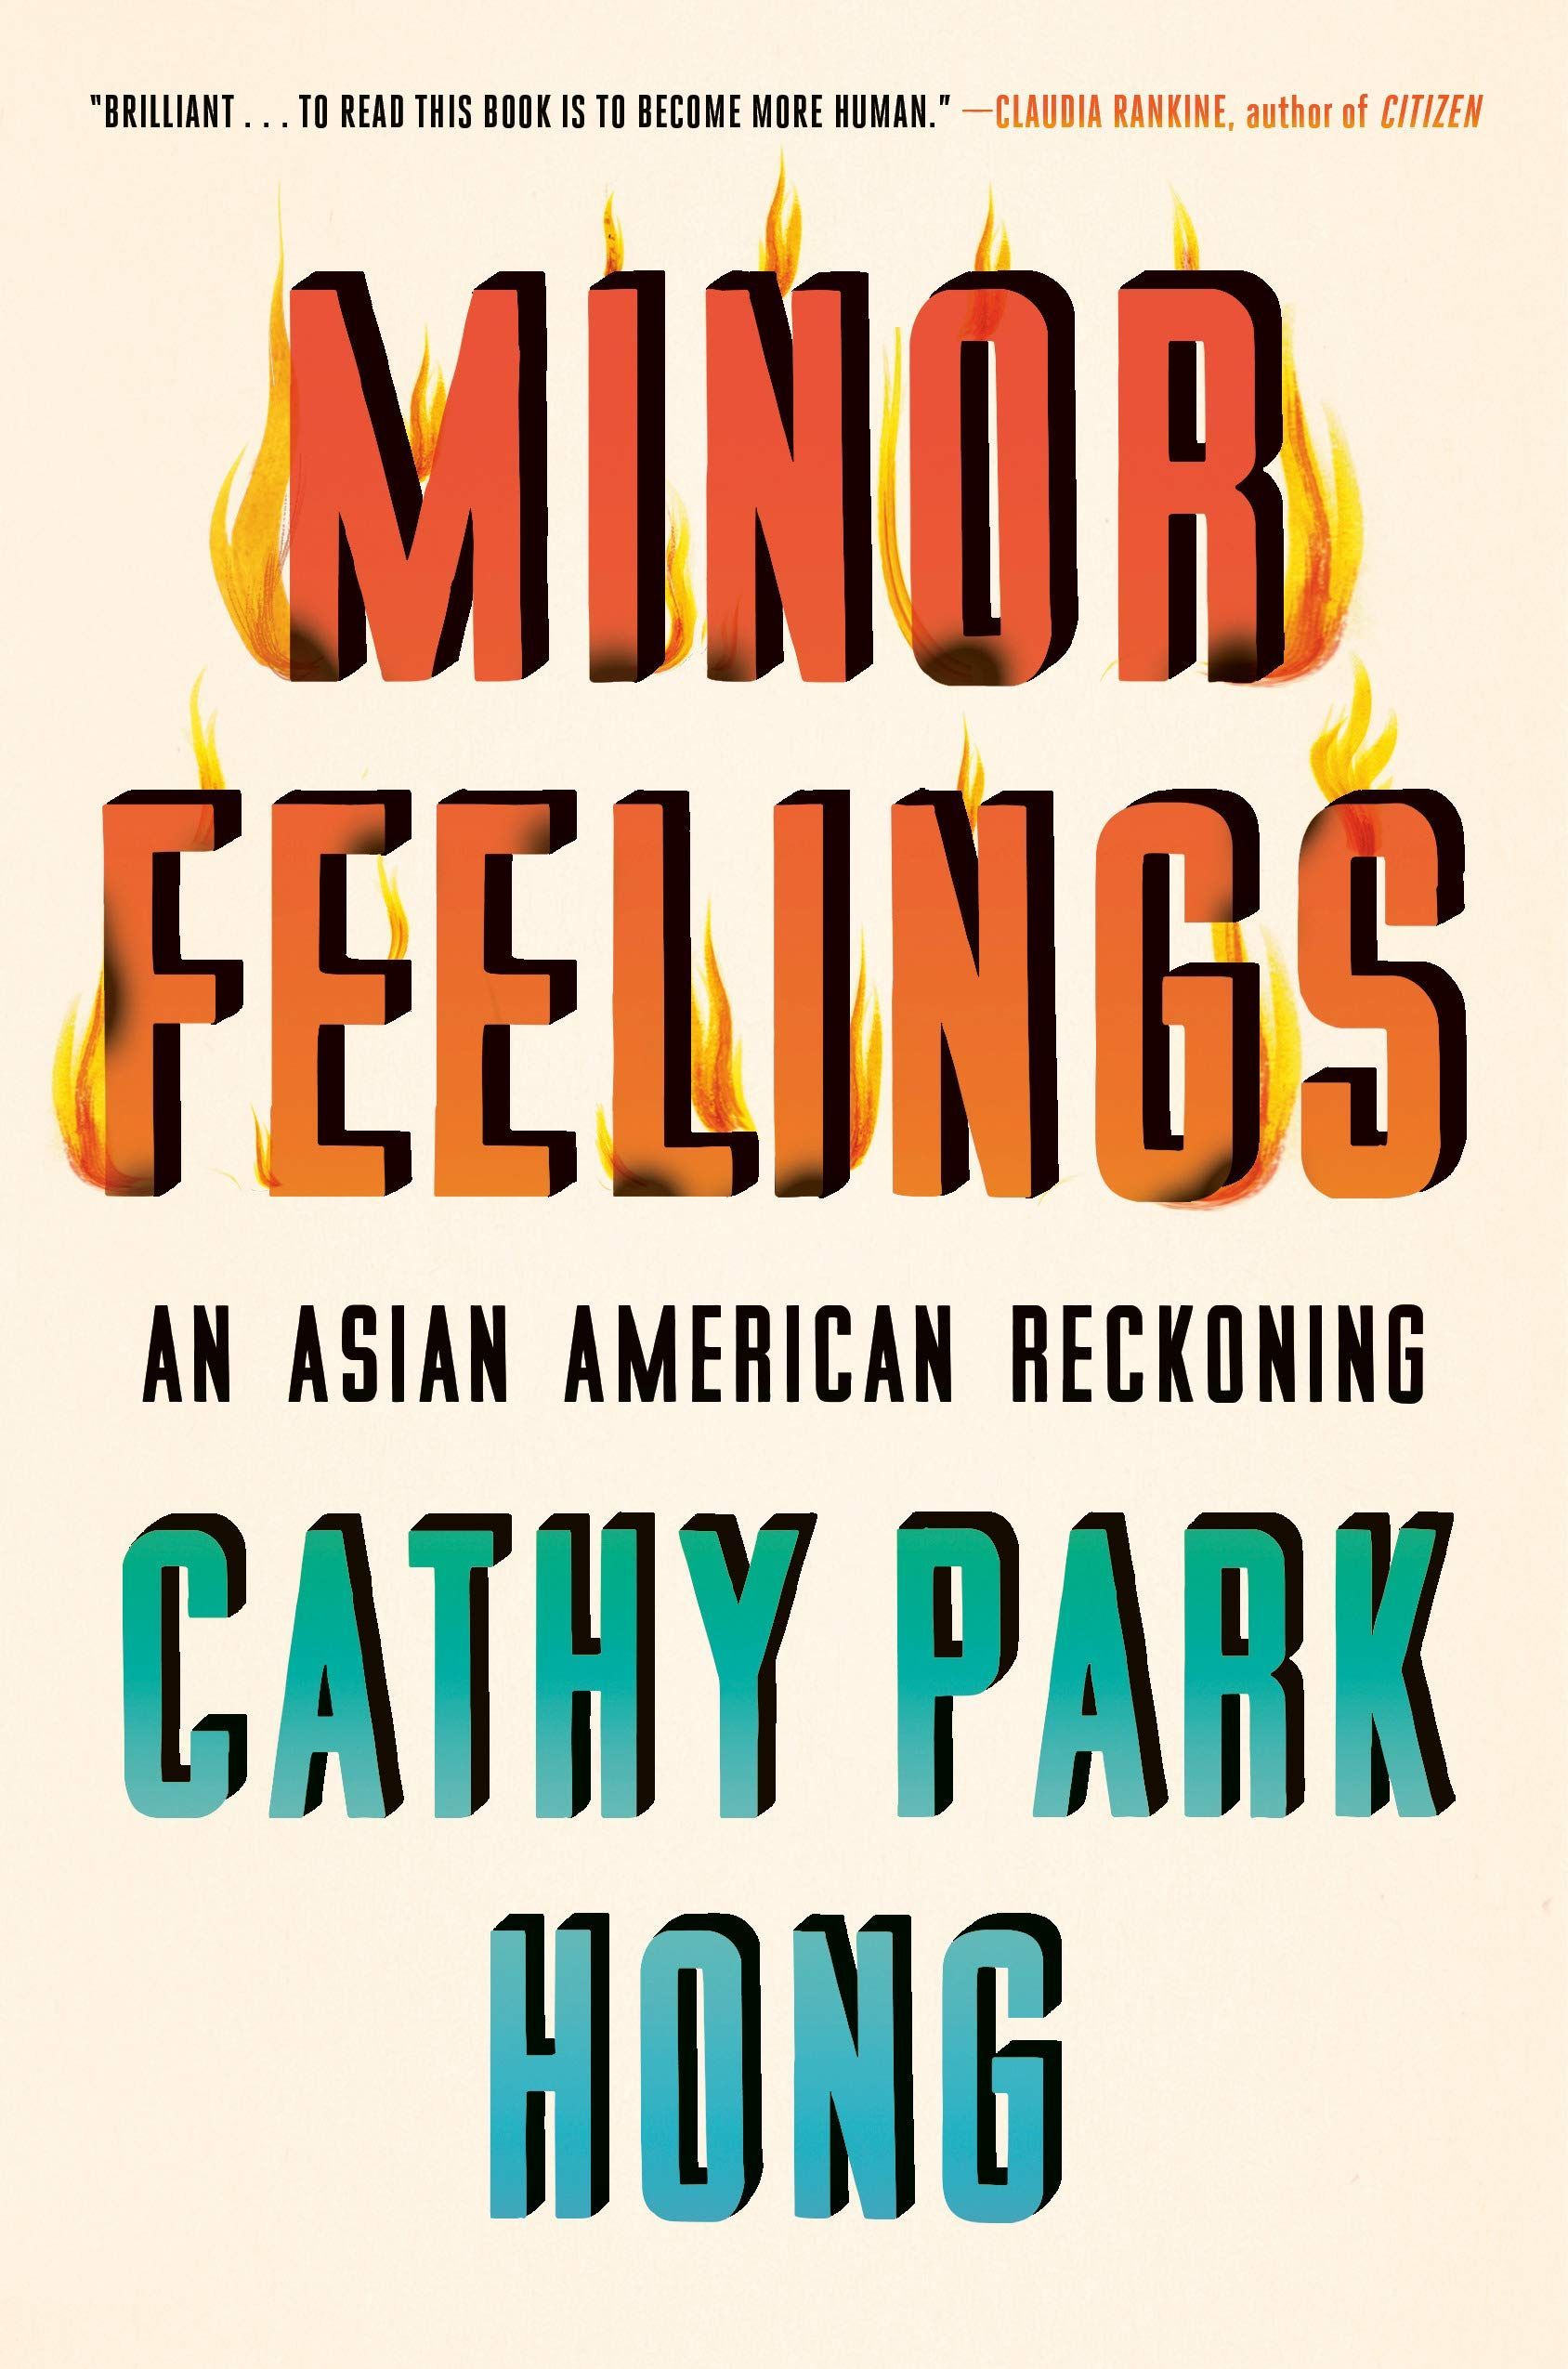 “Why Are You Pissed!”: On Cathy Park Hong’s “Minor Feelings: An Asian American Reckoning”